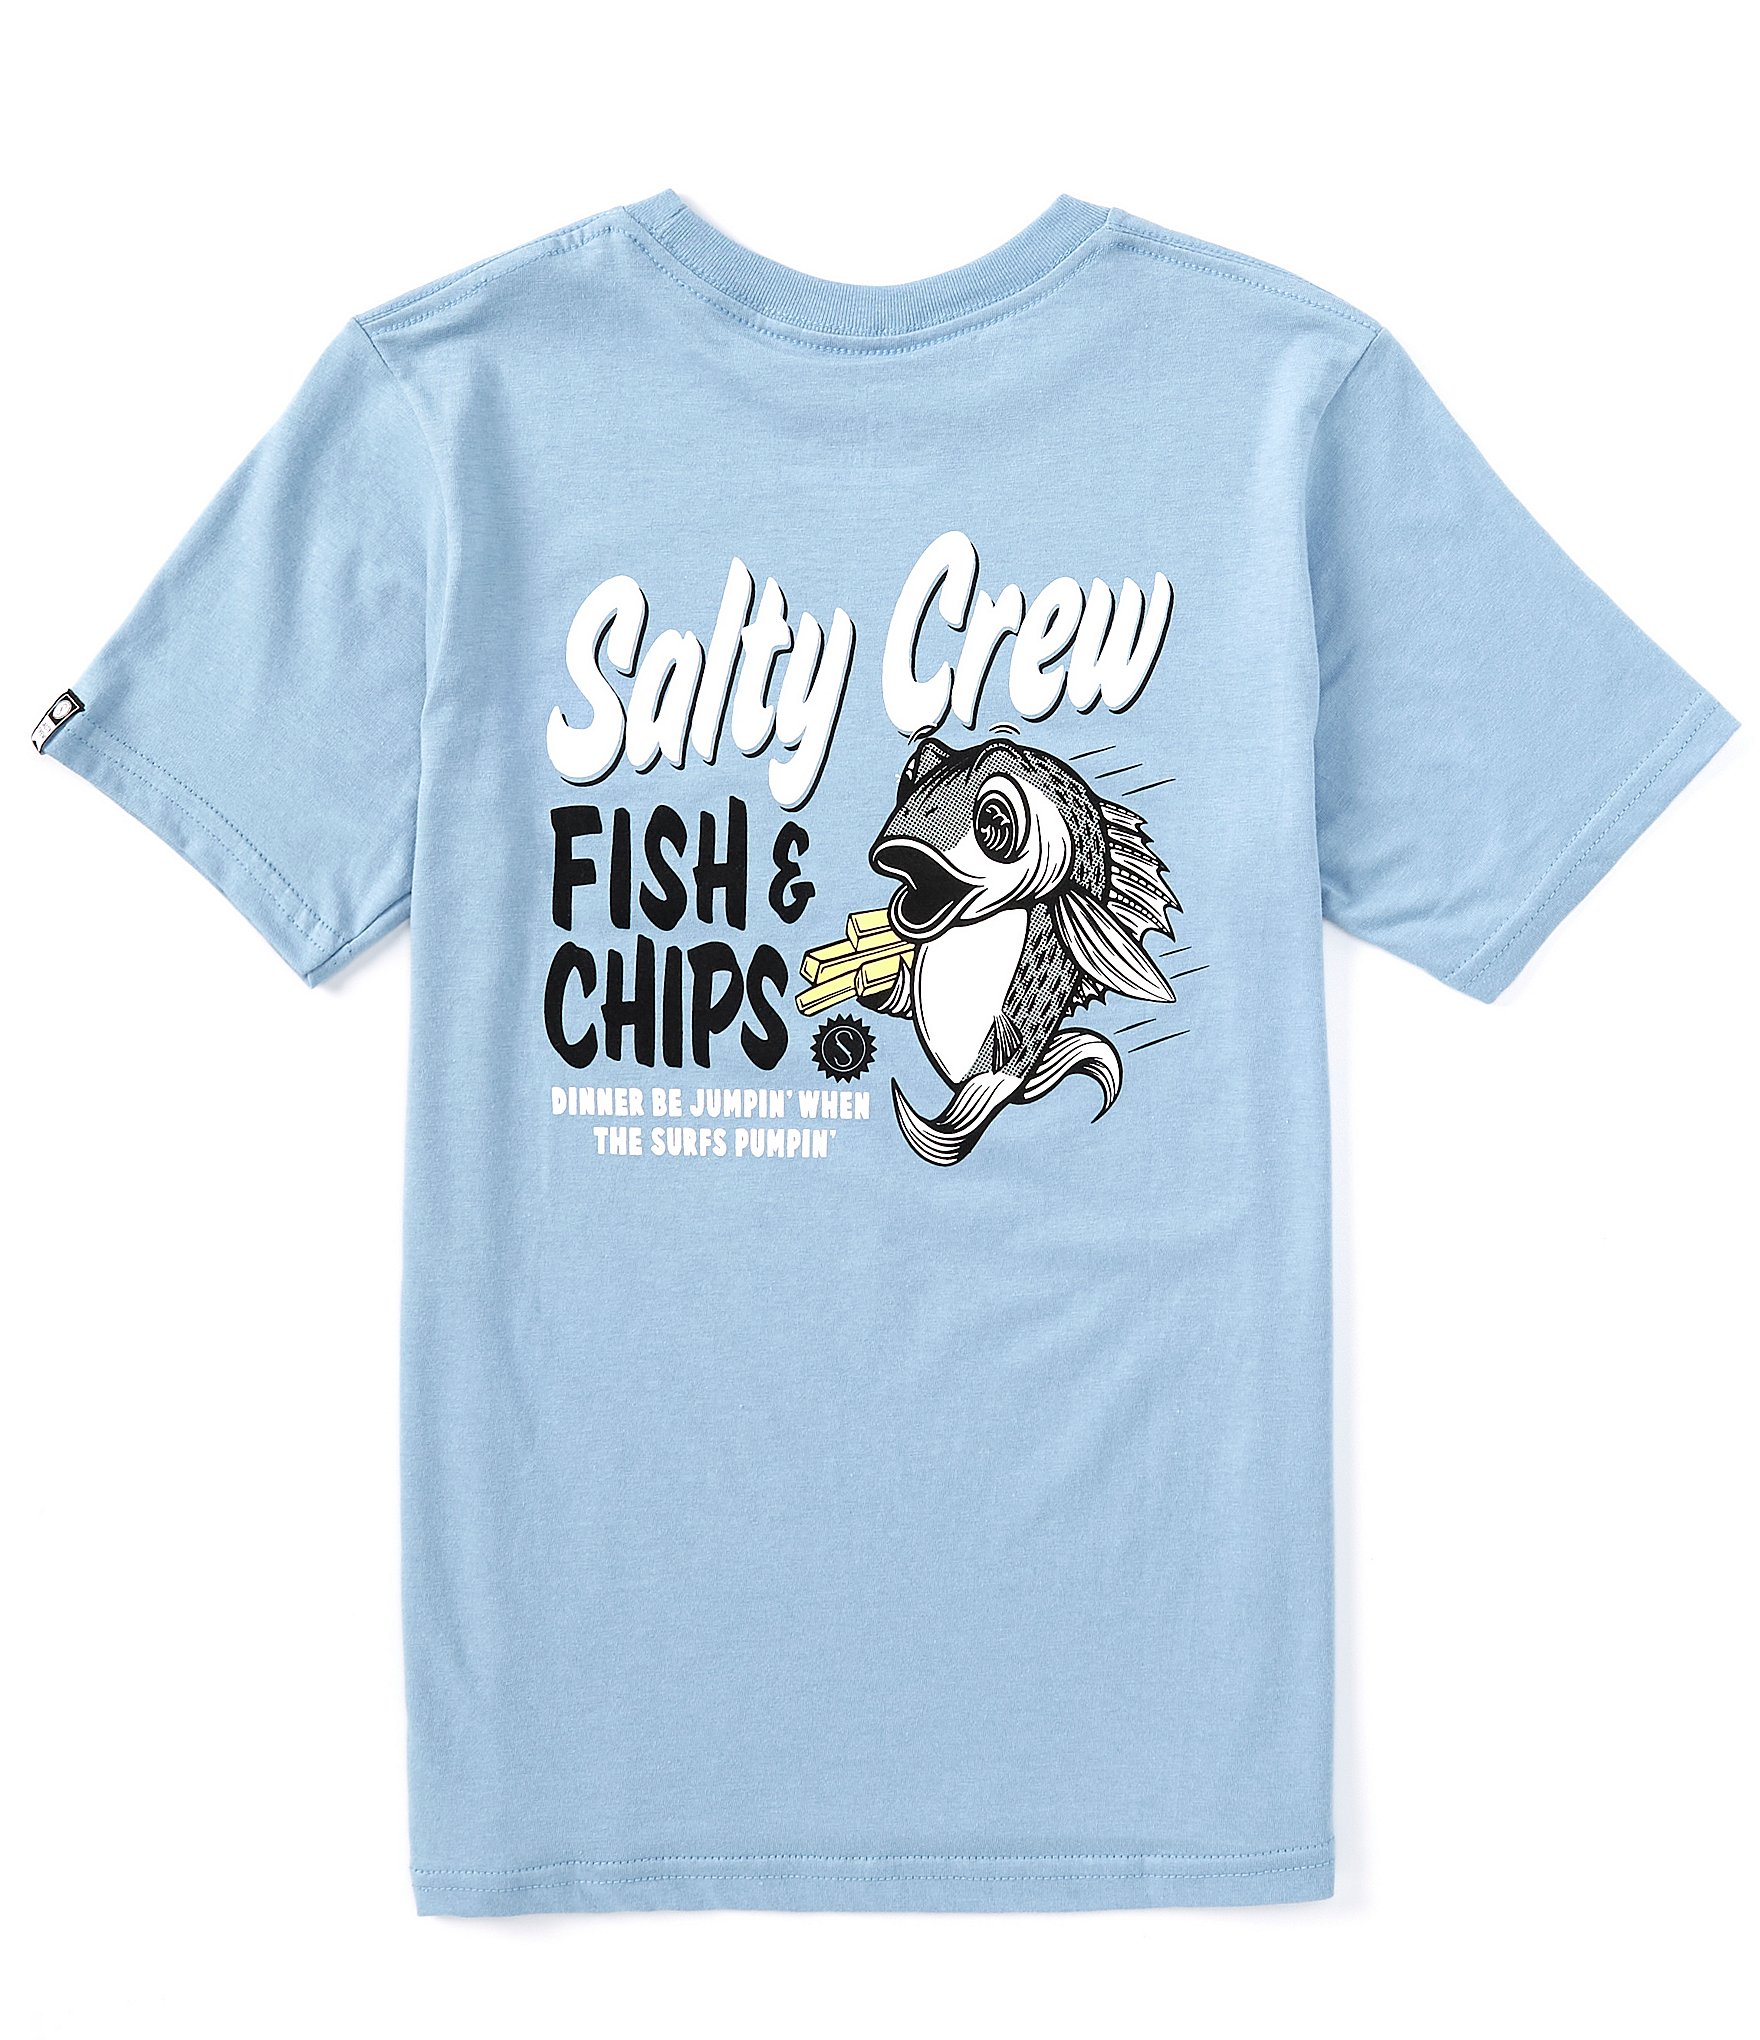 Salty Crew Fish and Chips Boys S/S Tee - Marine Blue, Marine Blue / XL